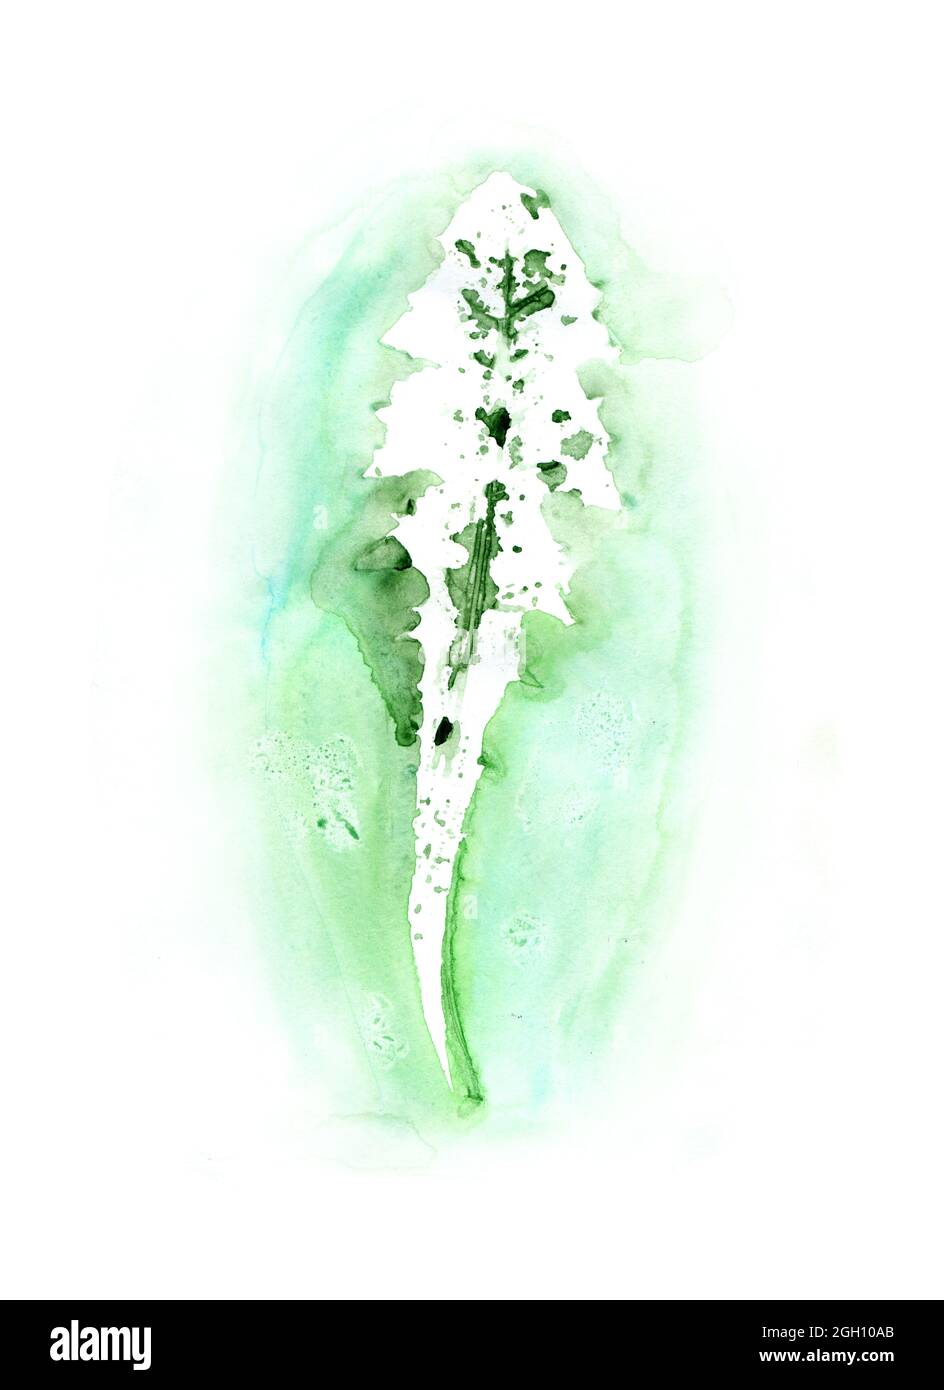 Green dandelion leaf on a white background. Watercolor illustration of plant leaves. Stock Photo